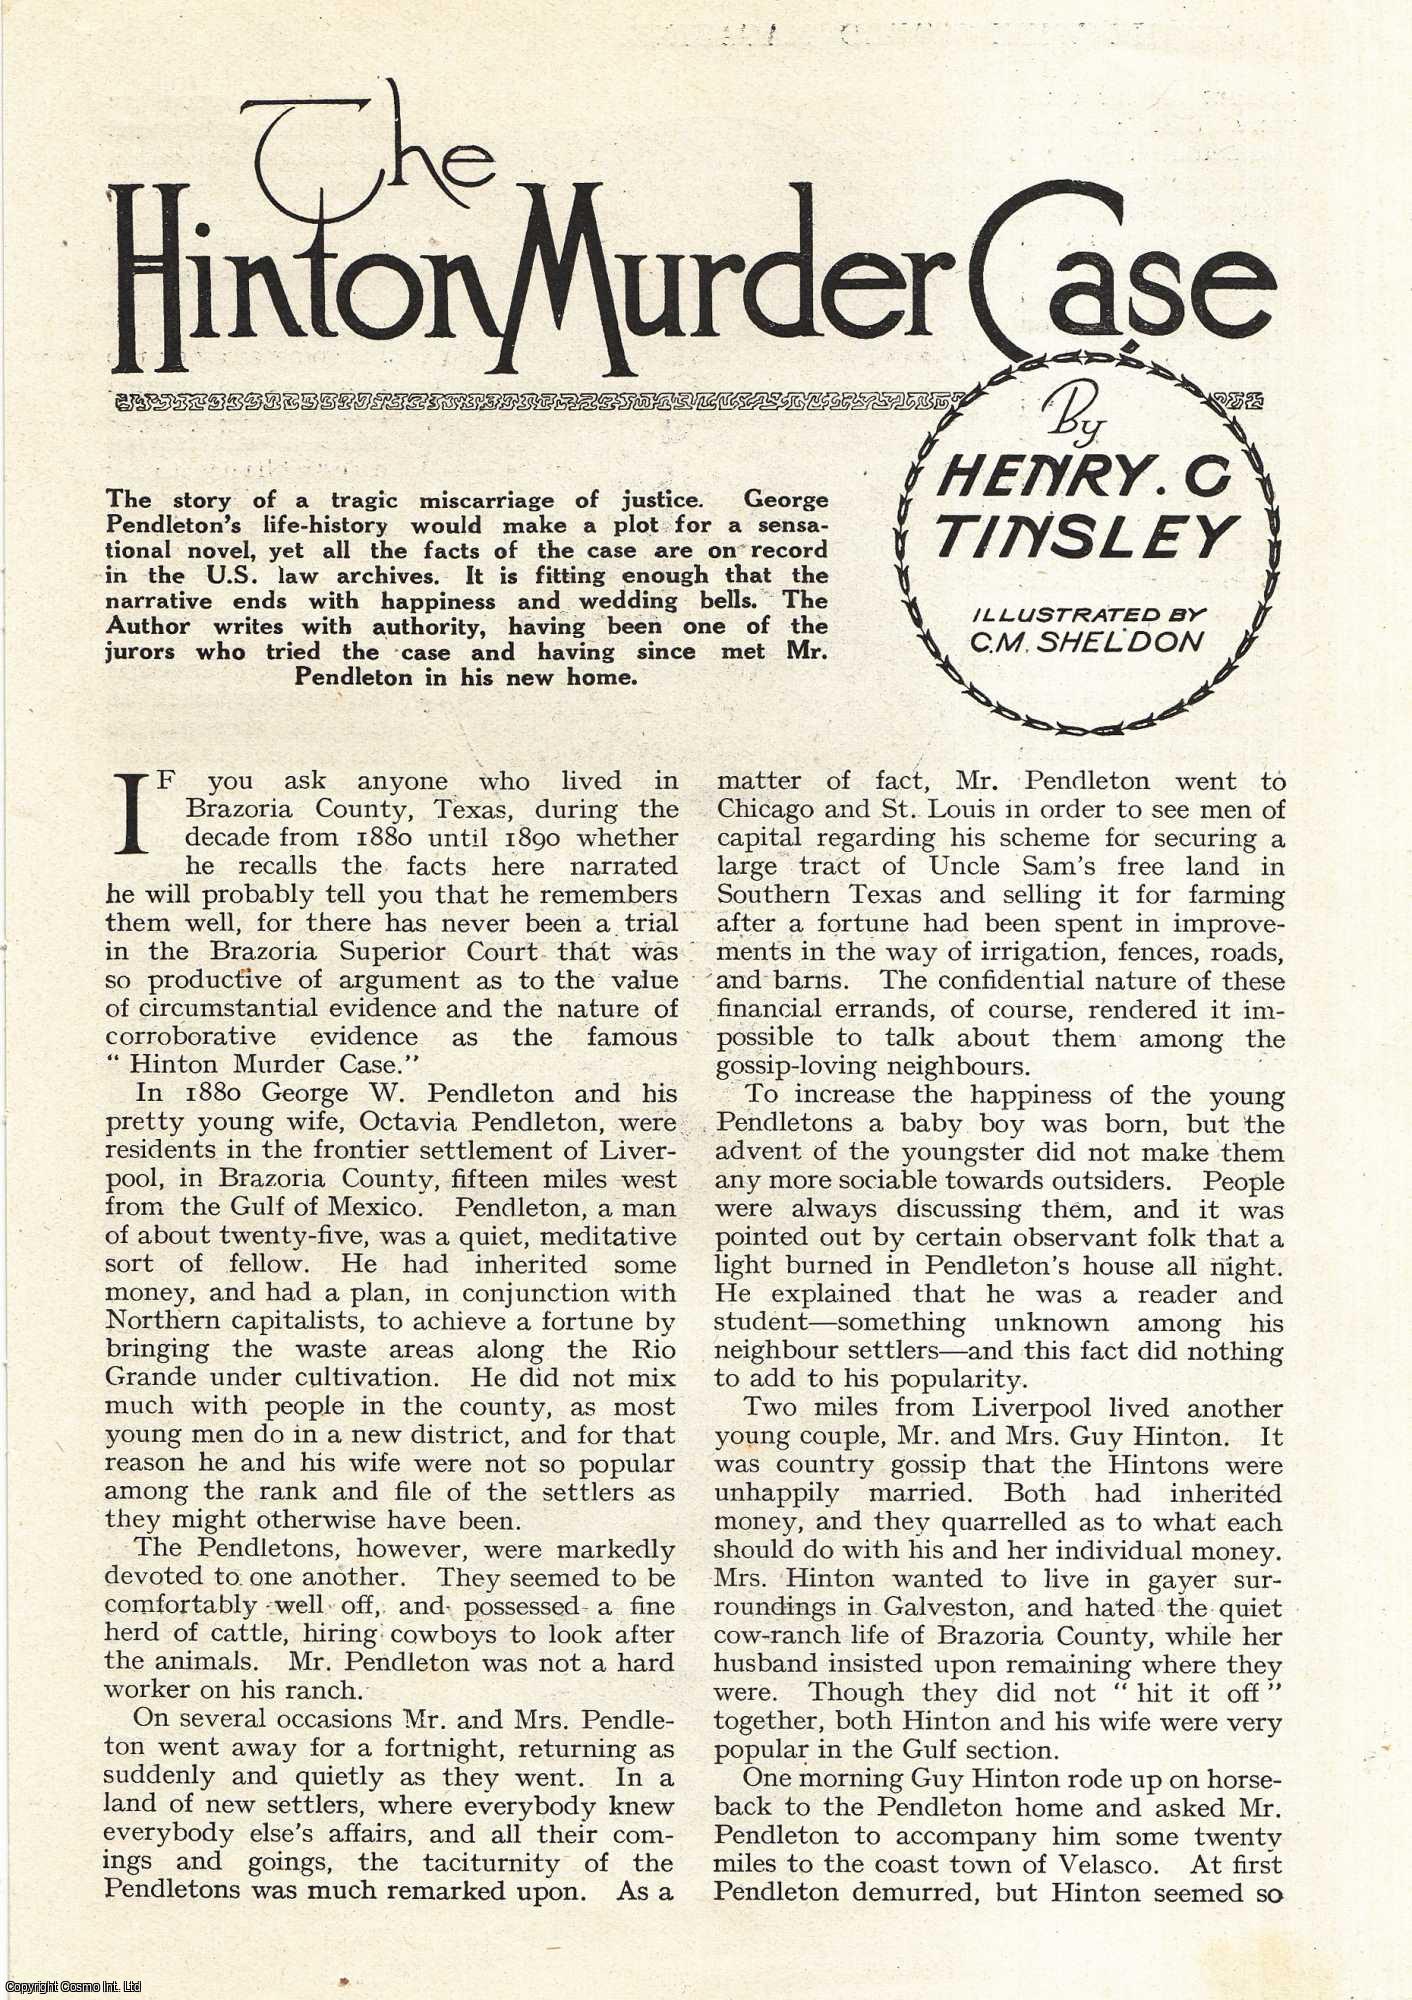 Henry C. Tinsley, illustrated by C.M. Sheldon - The Hinton Murder Case : the story of a tragic miscarriage of justice. This is an uncommon original article from the Wide World Magazine, 1921.